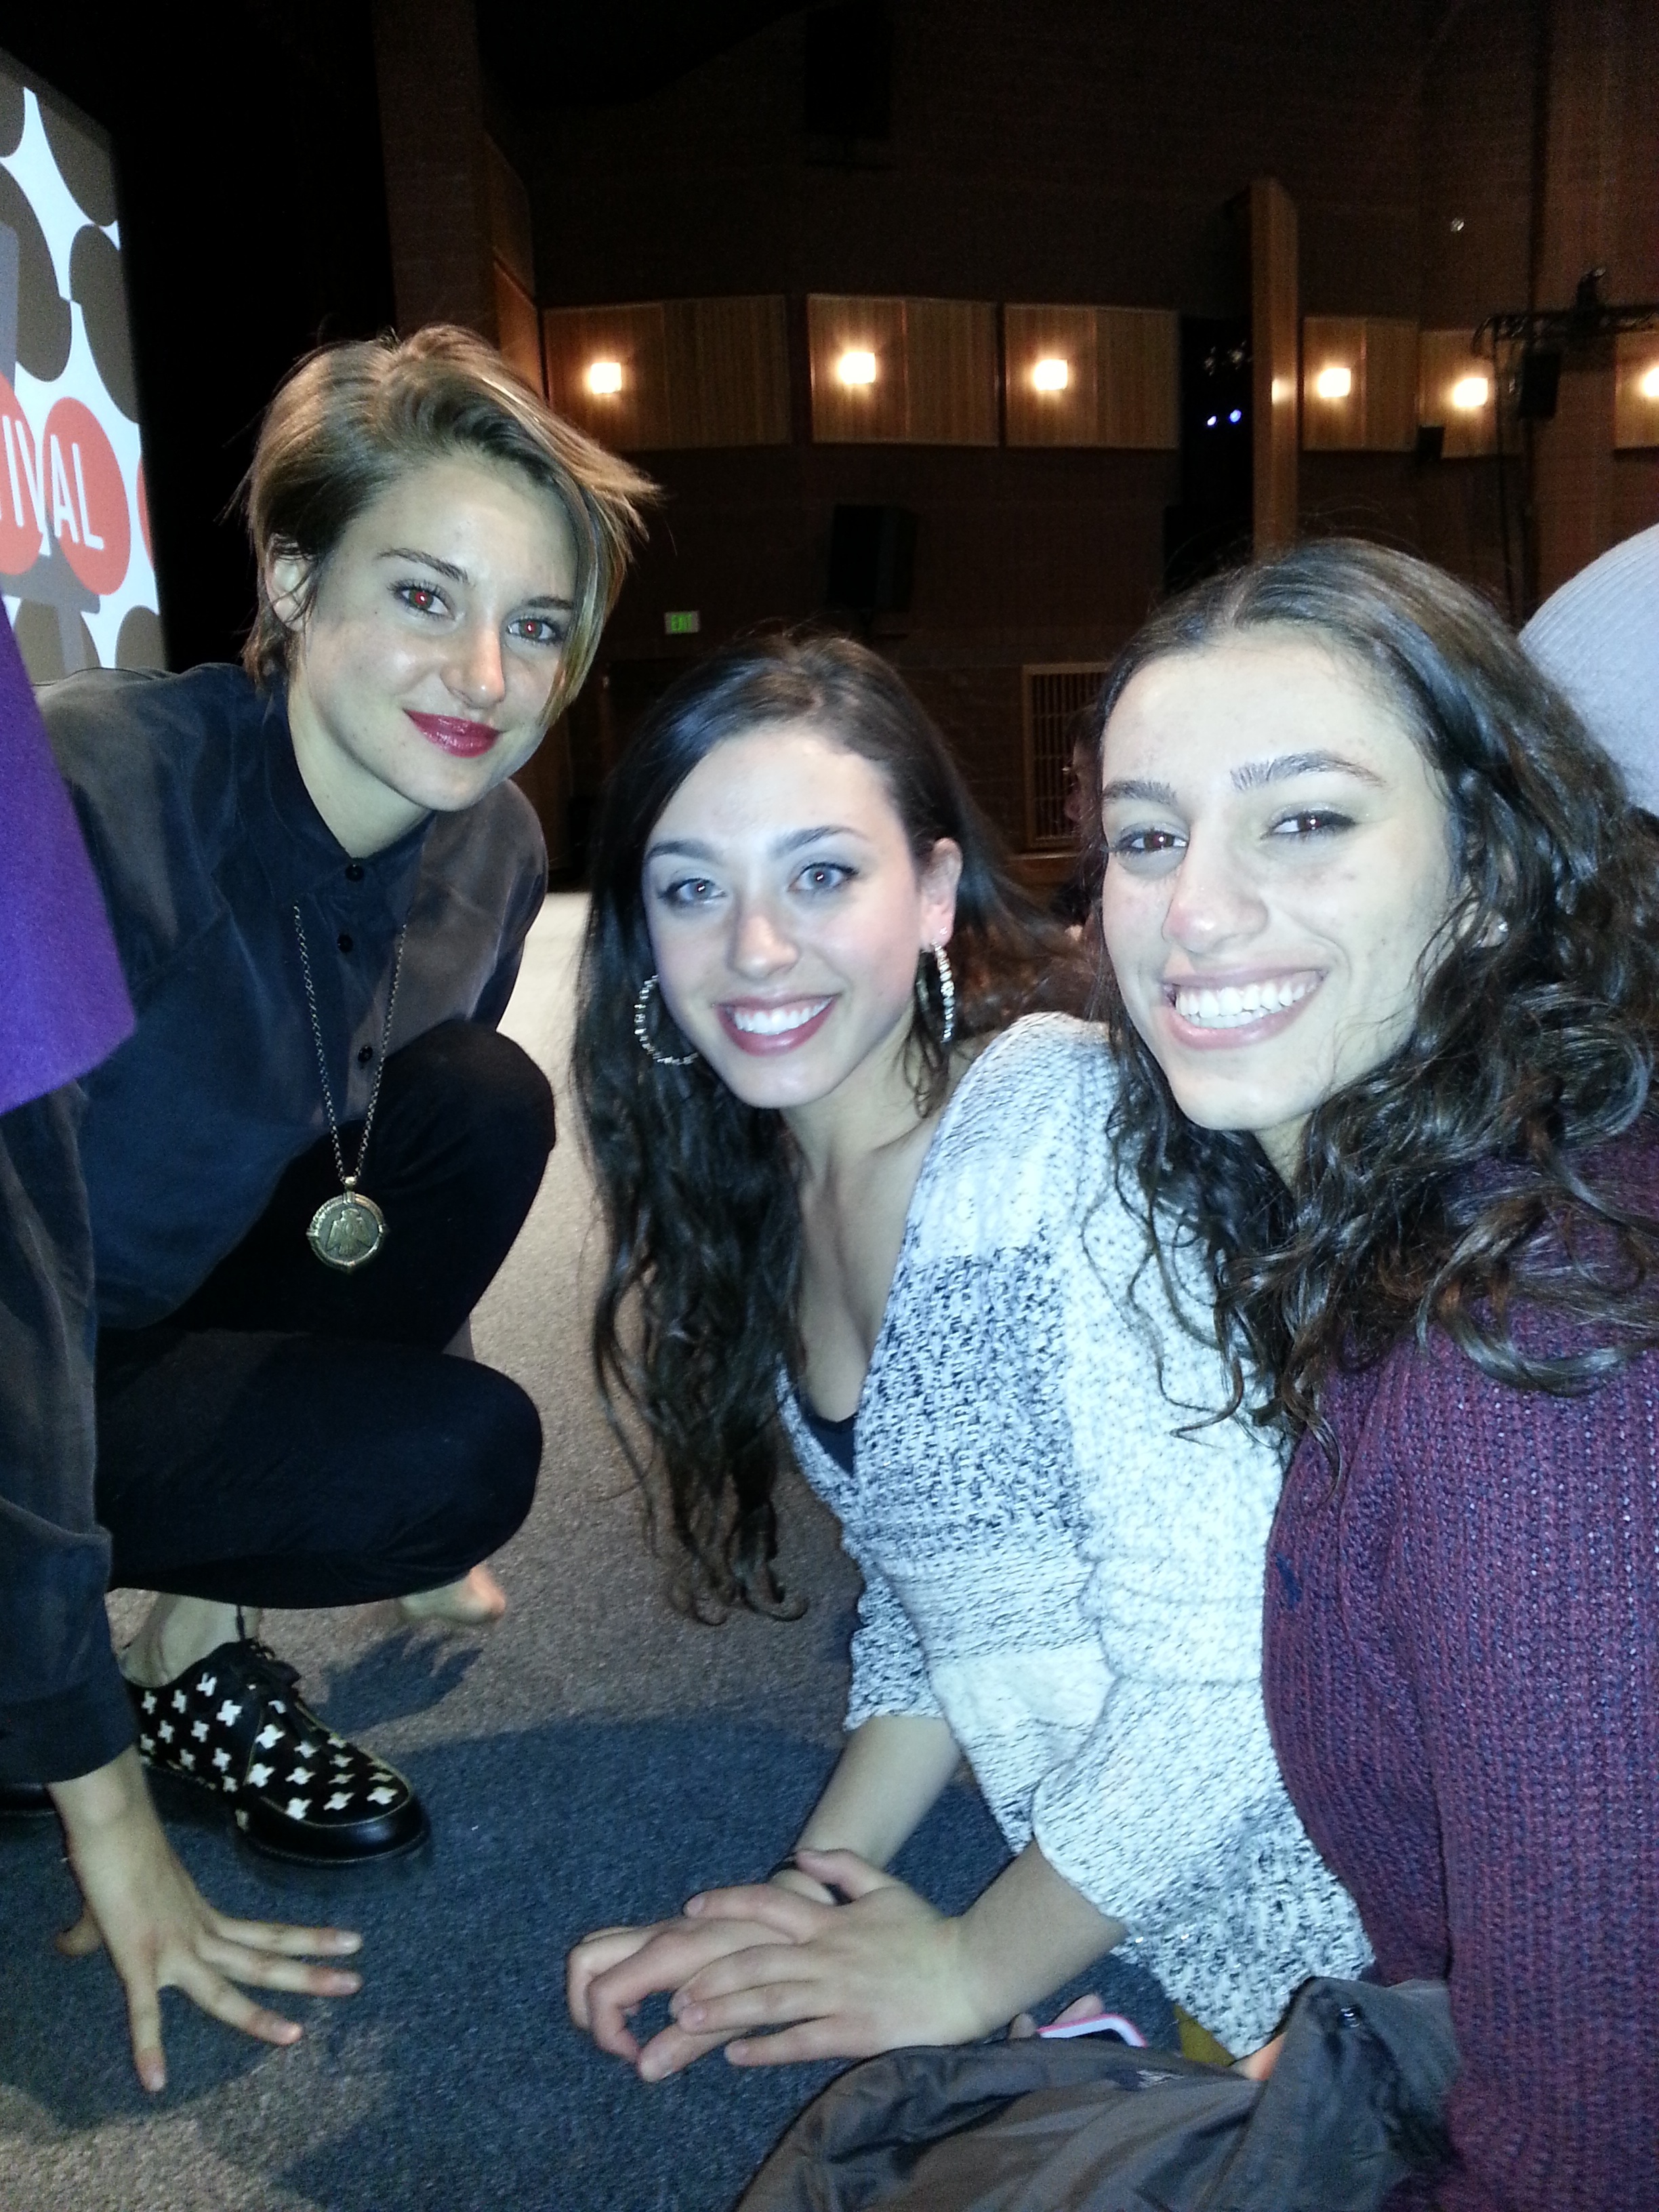 with Shailene Woodley at the Sundance premiere of White Bird in a Blizzard